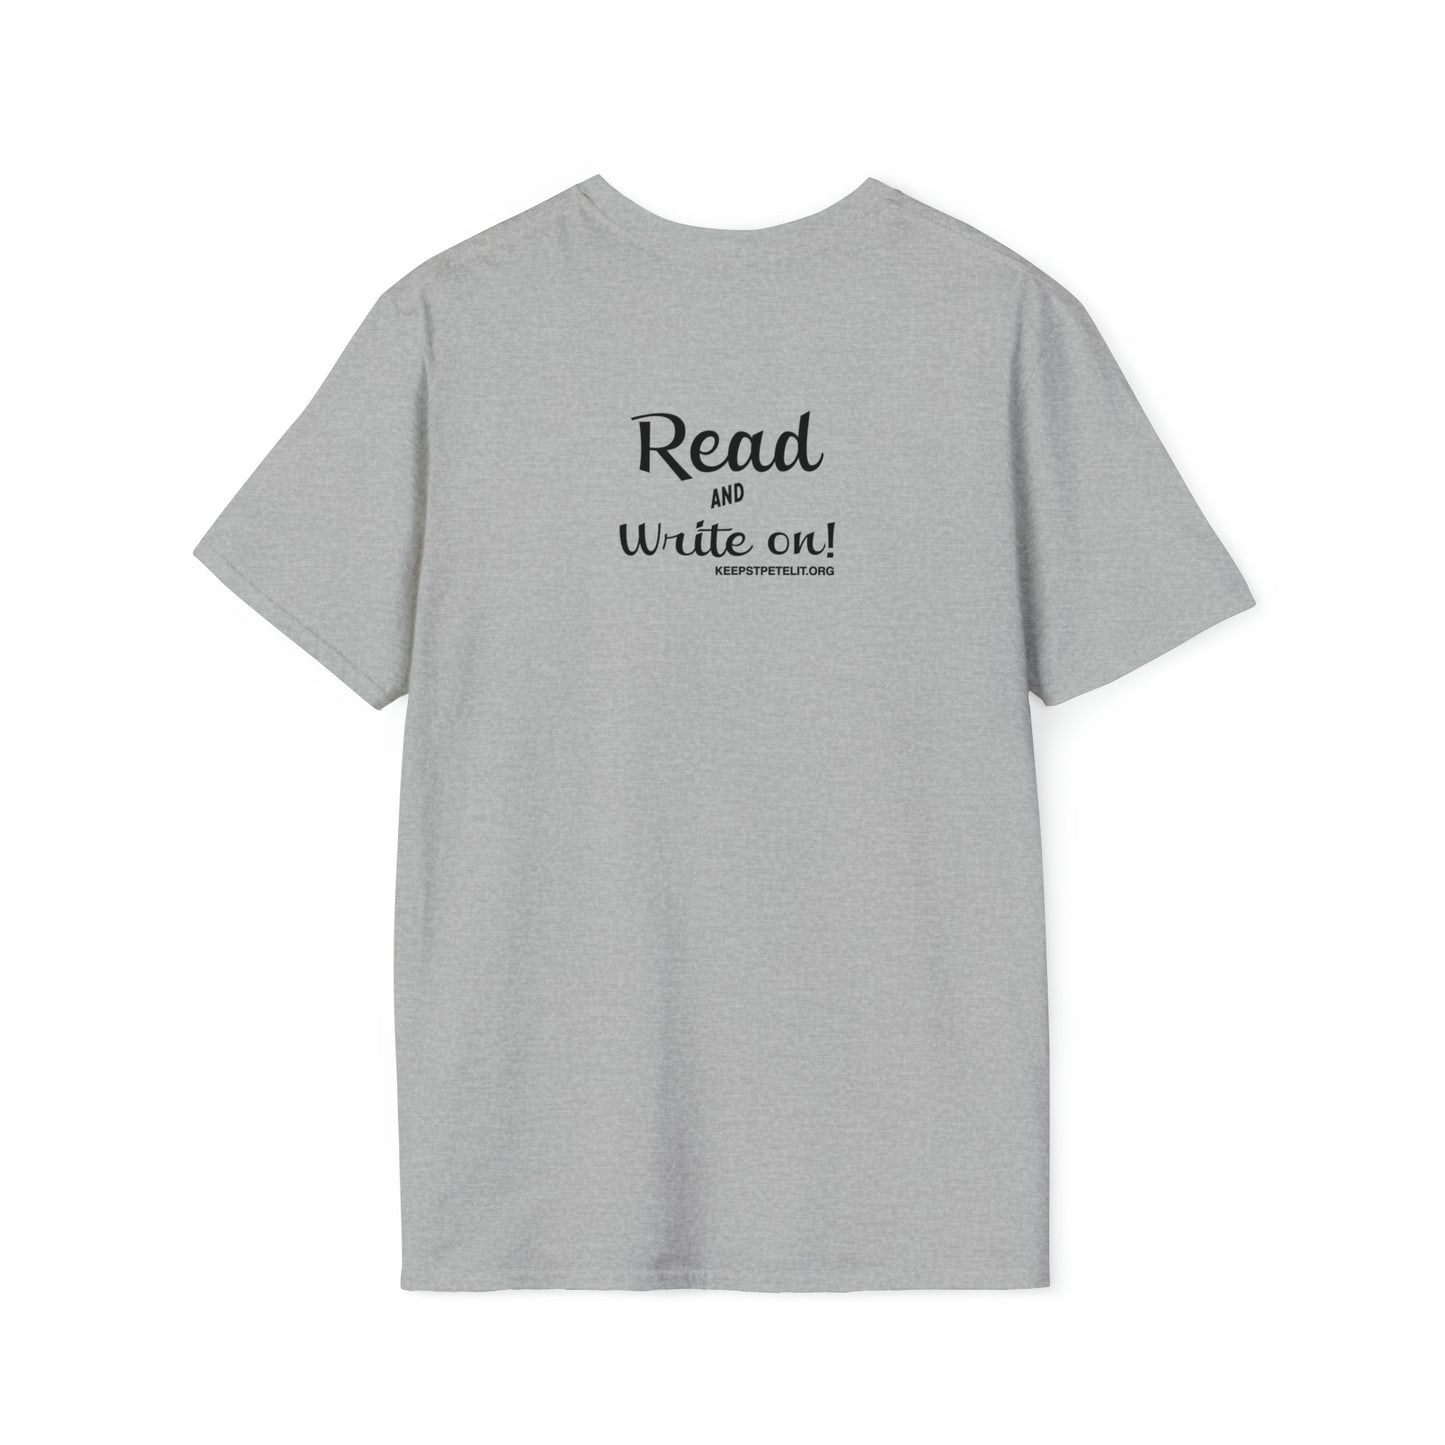 2-Sided "Well Read" Unisex Softstyle T-Shirt